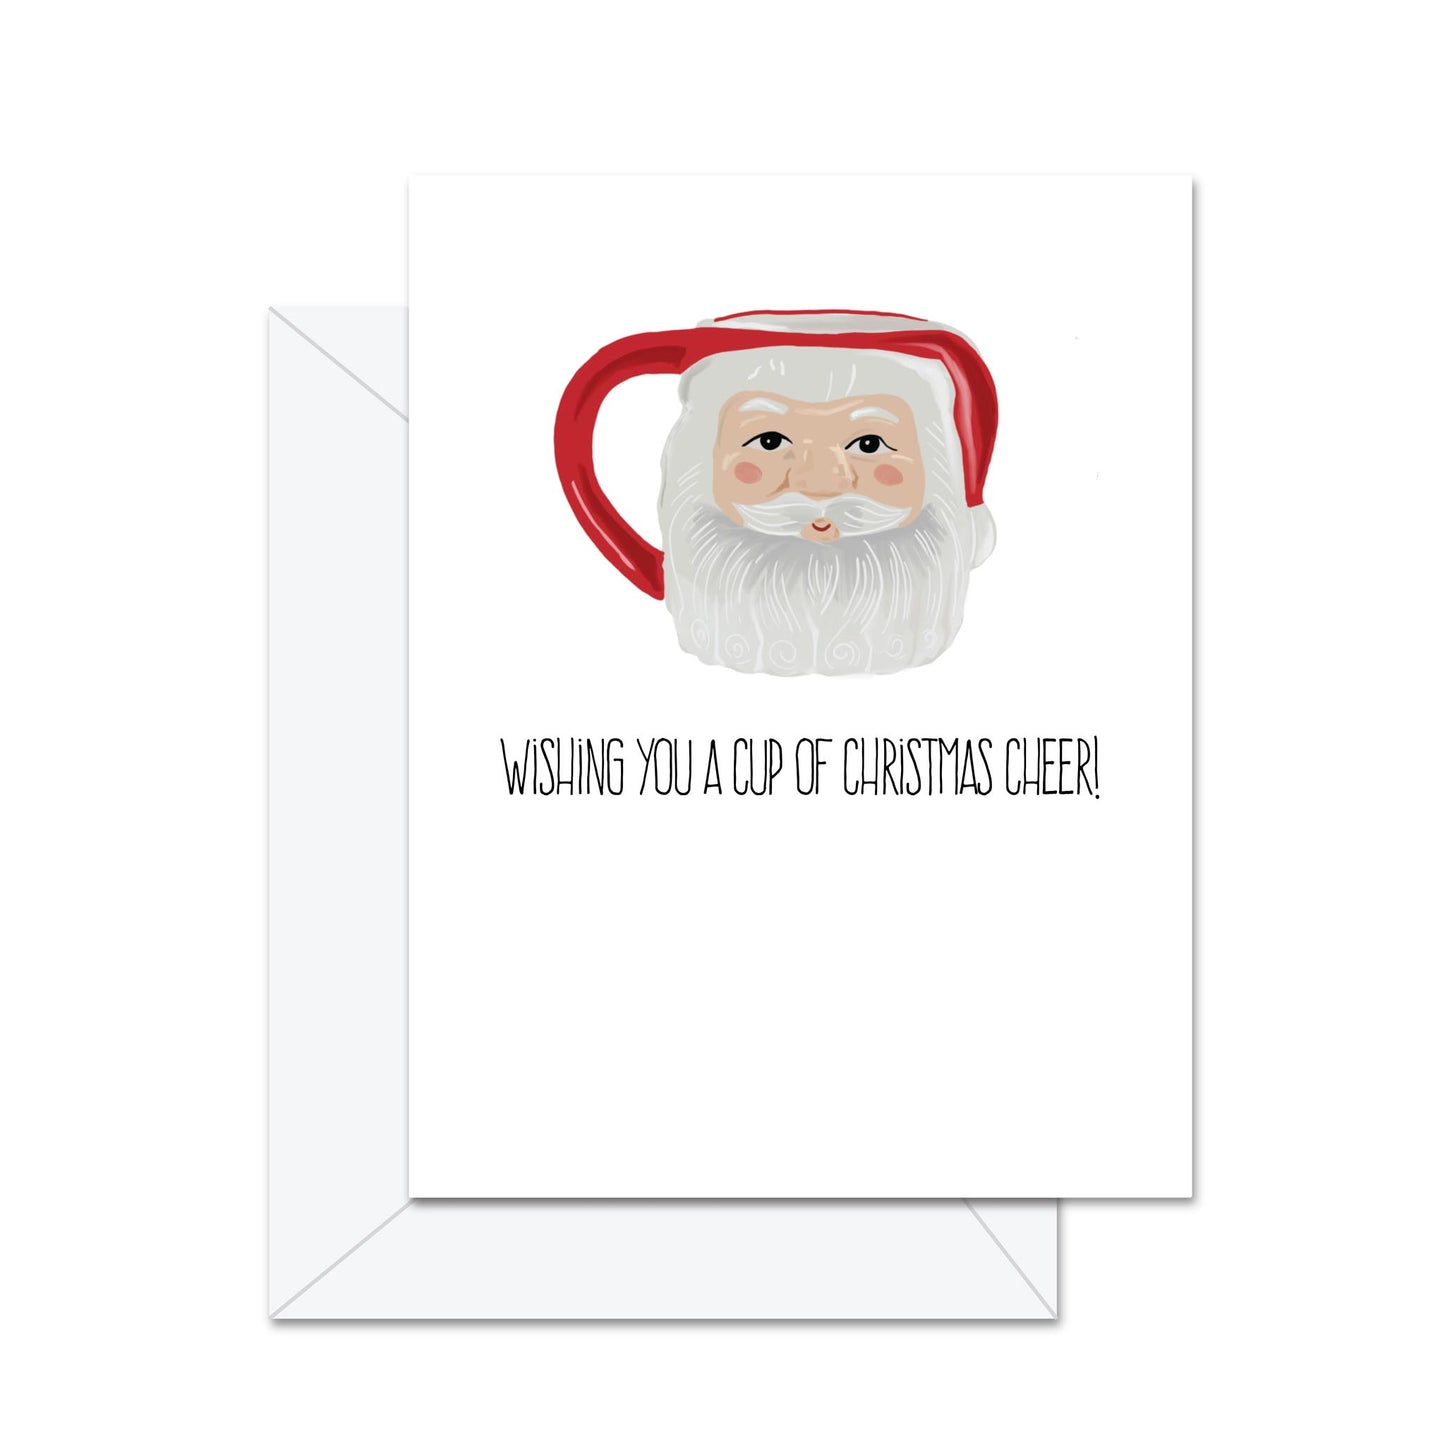 Wishing You A Cup Of Christmas Cheer - Greeting Card